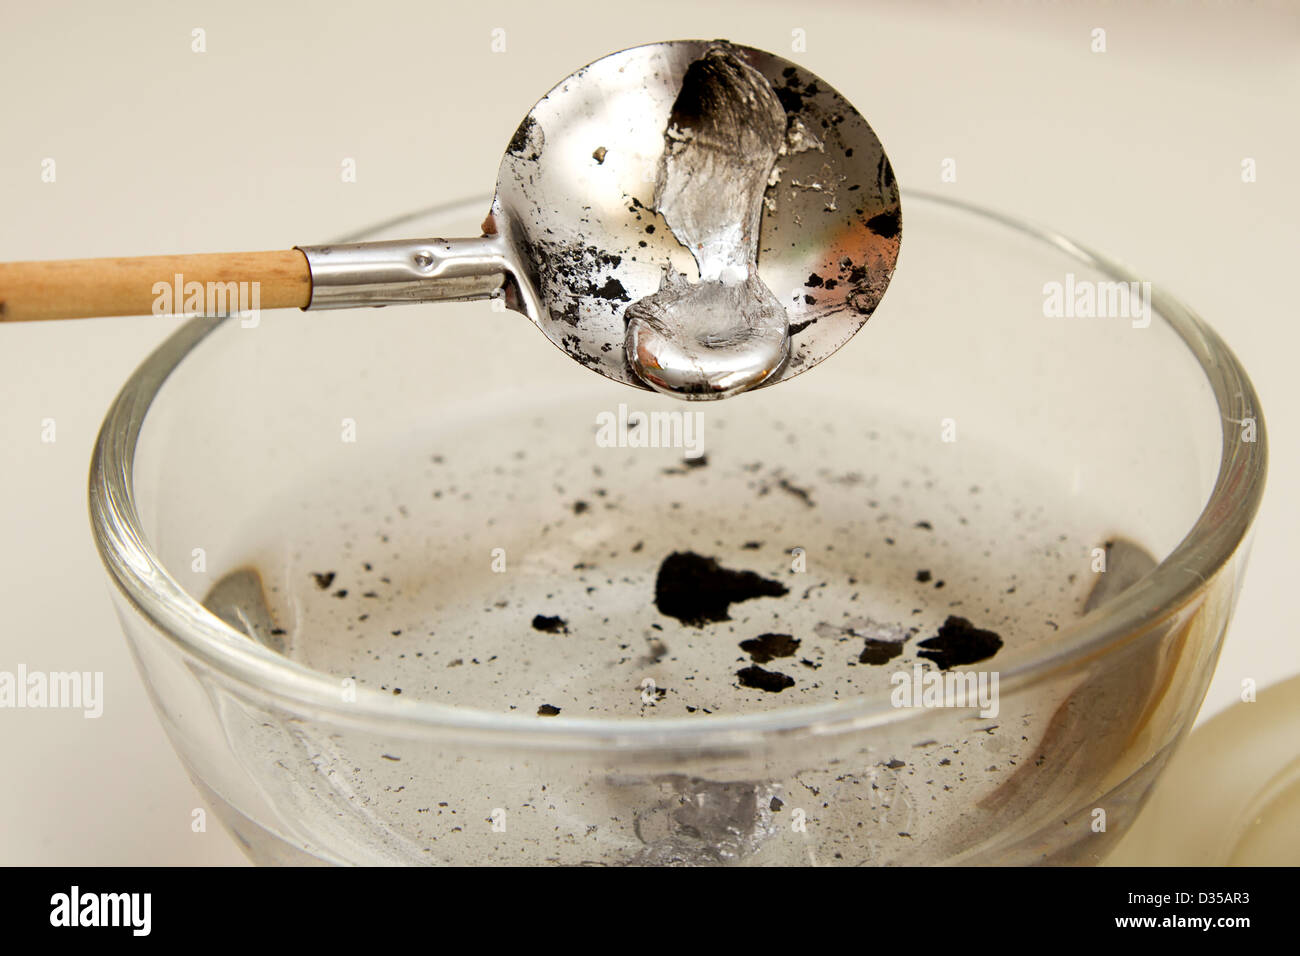 New year tradition melting lead Stock Photo